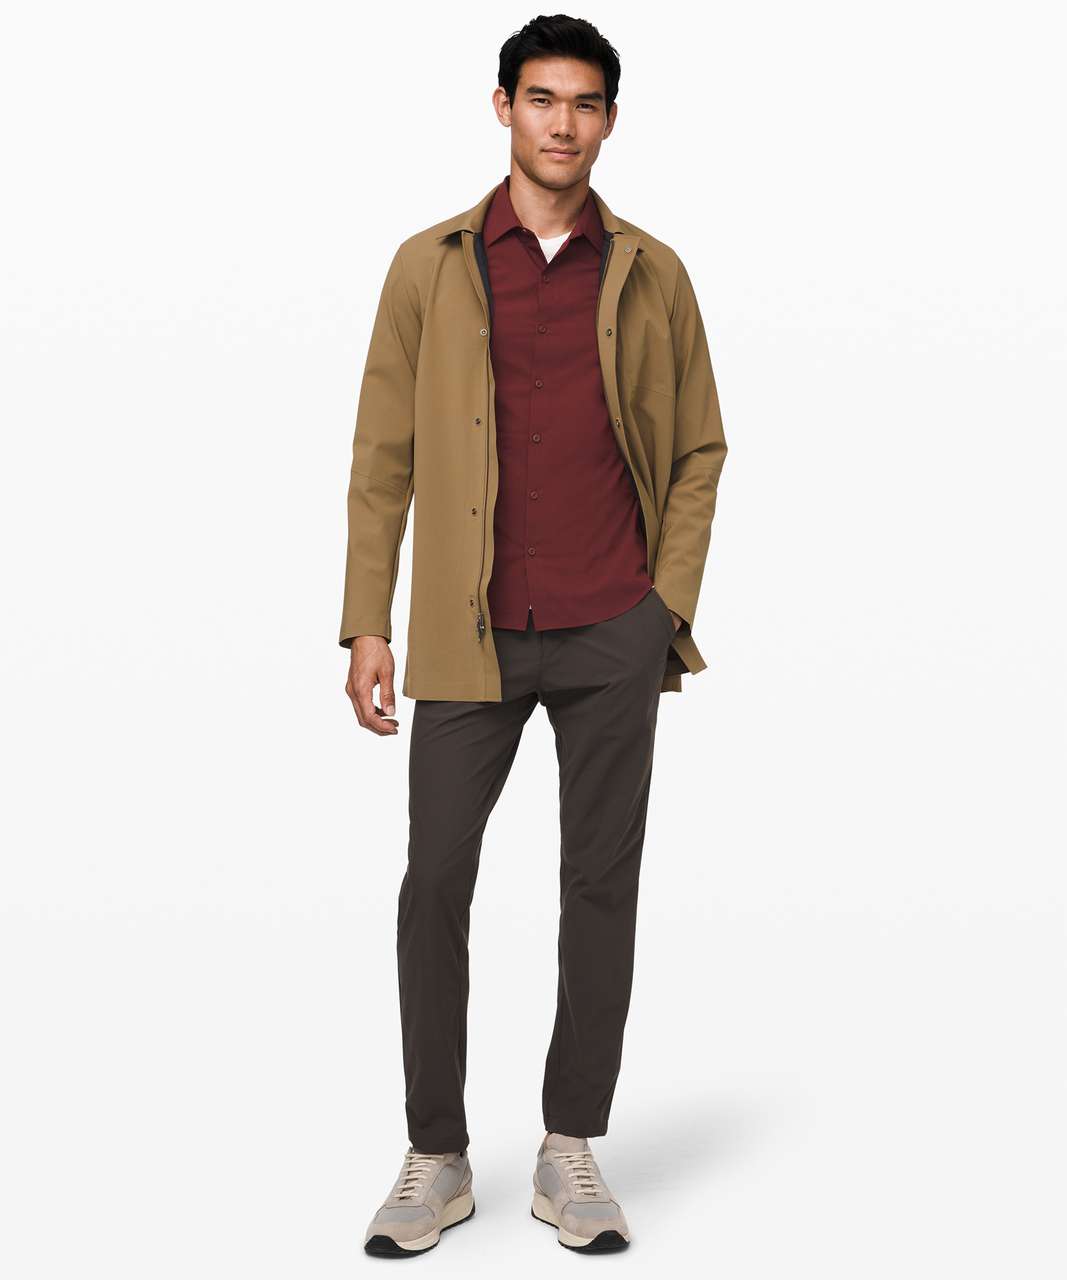 Lululemon Down to the Wire Slim Fit Long Sleeve - Mahogany